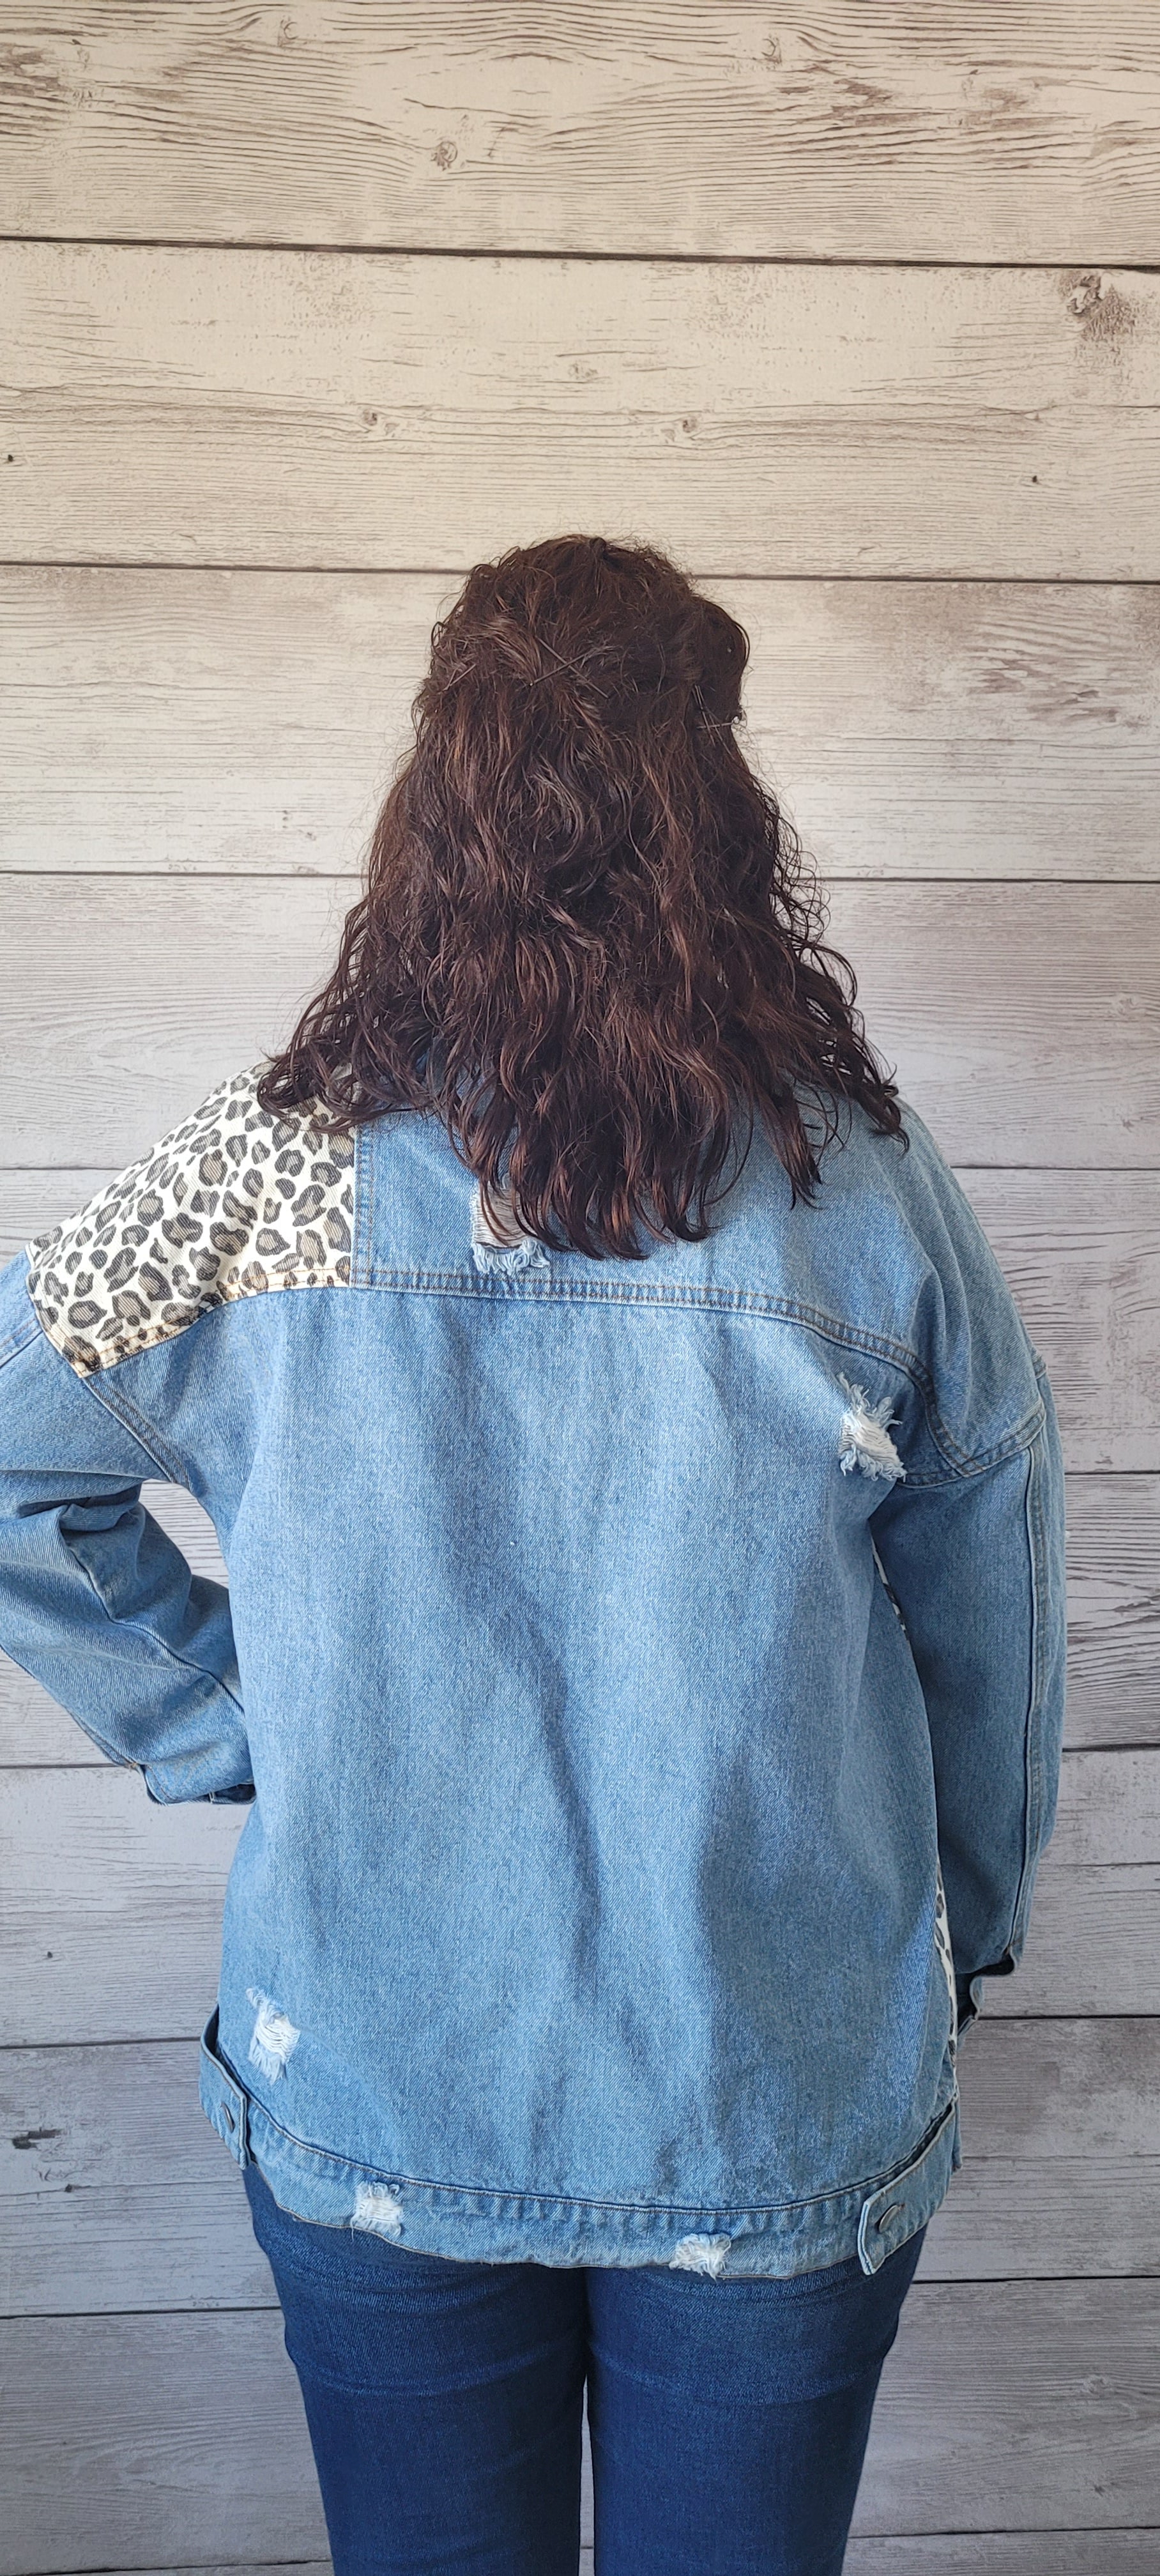 This is a perfect staple piece for everyday wear on those cool days. Imagine yourself in this unique and cute jean jacket. "Blue Jean Baby" features a leopard print throughout, with a distressed look, buttons down the front and on the sleeve cuffs. This is a light wash denim that offers pockets on the front. Sizes small through large.